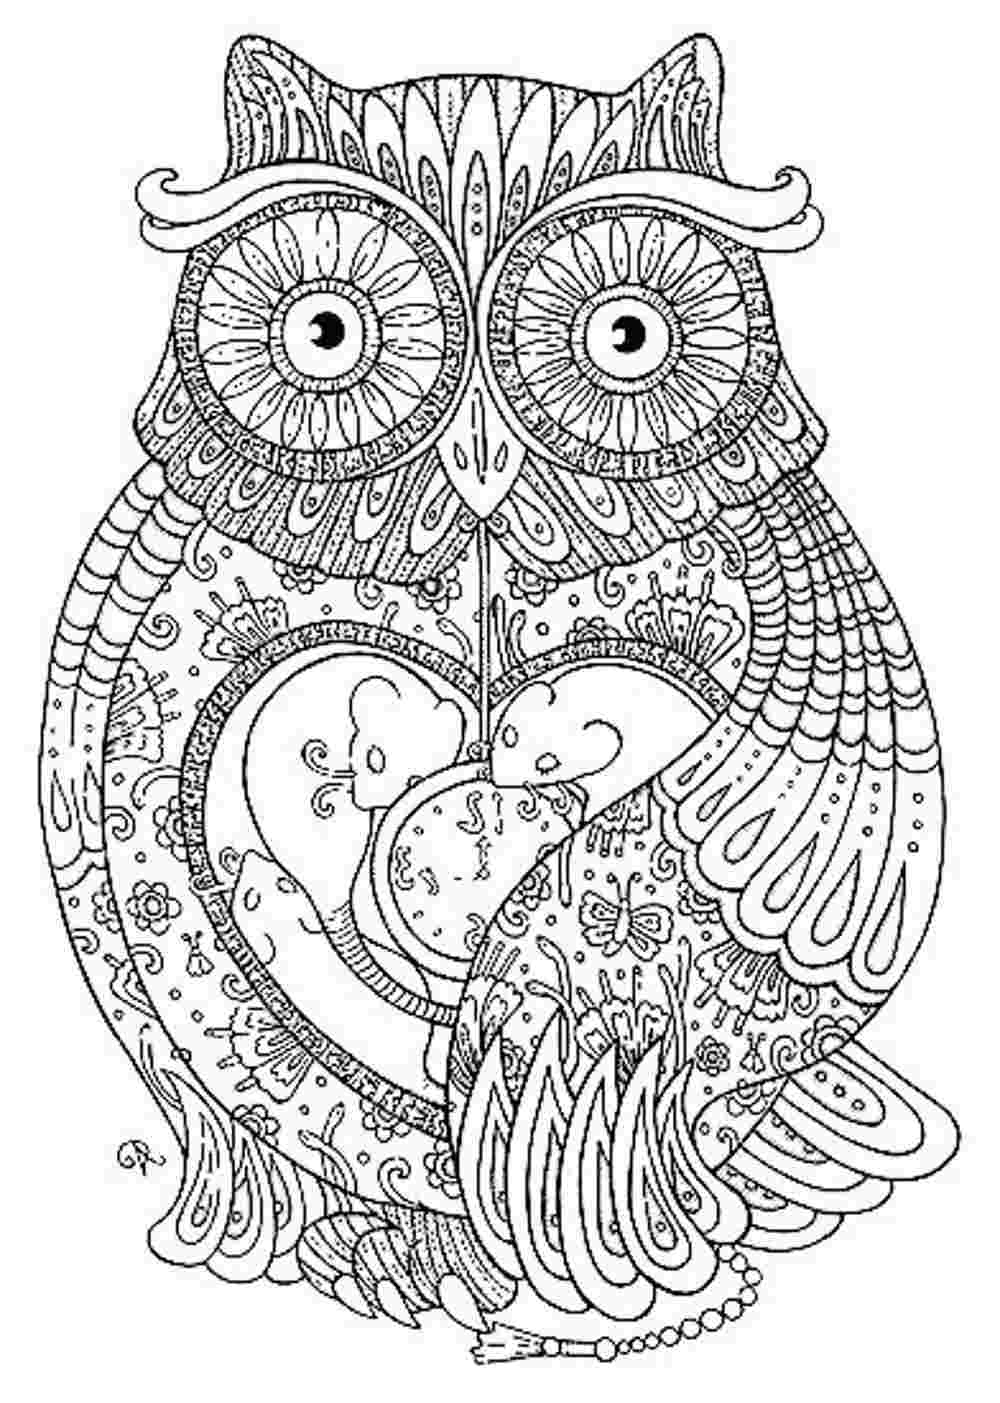 Awesome Animals adult Coloring Pages, Coloring Pages Printable